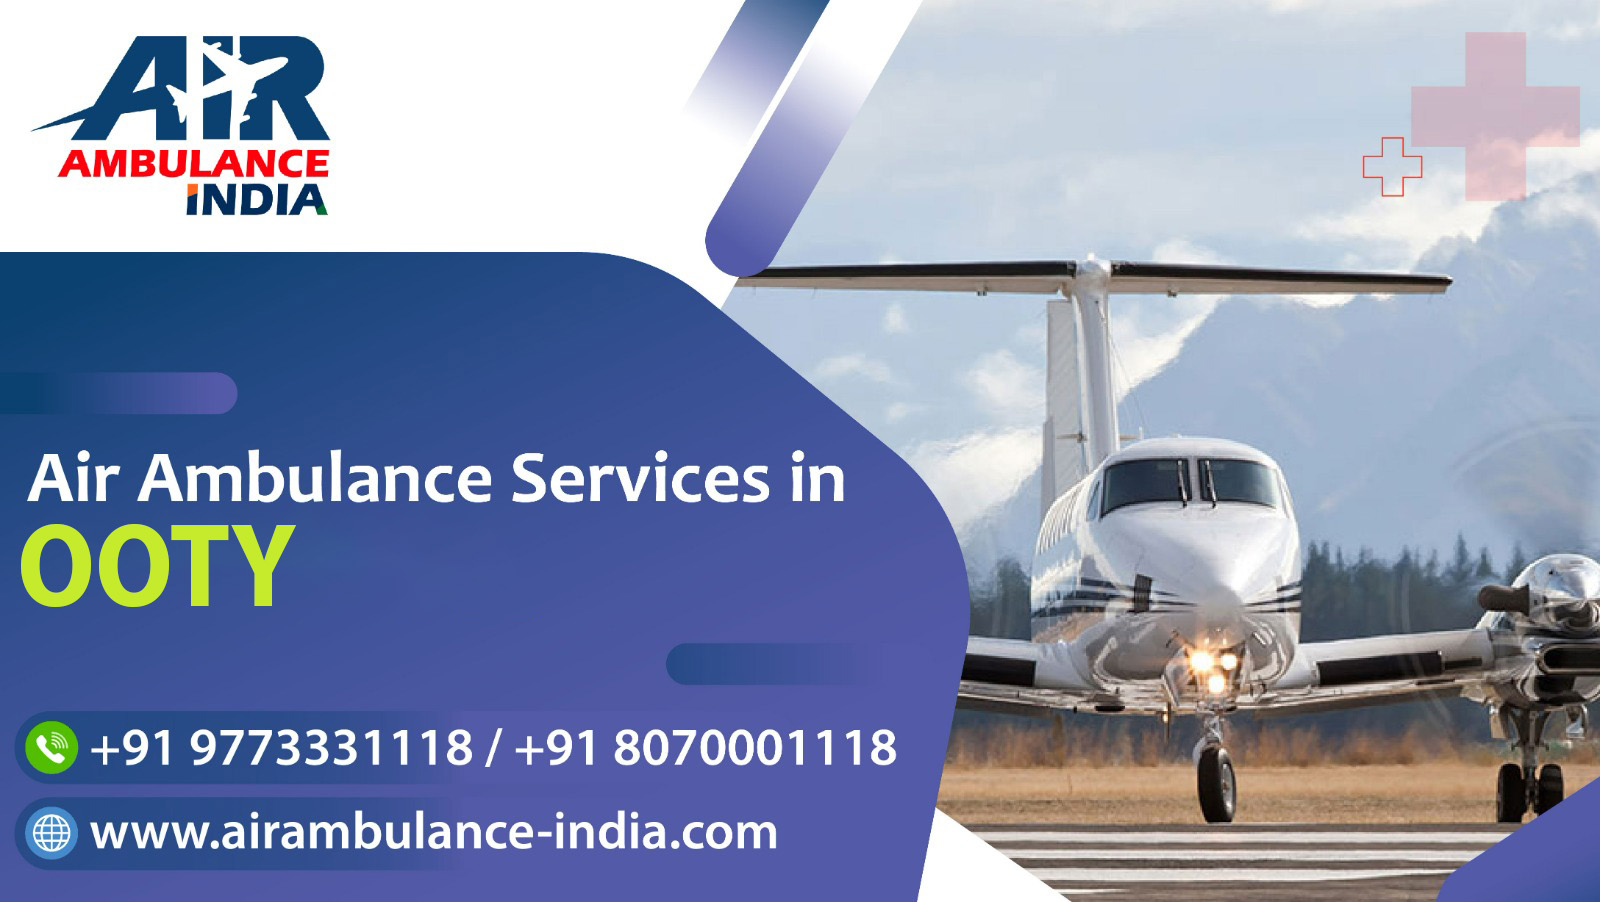 Air Ambulance Services in Ooty